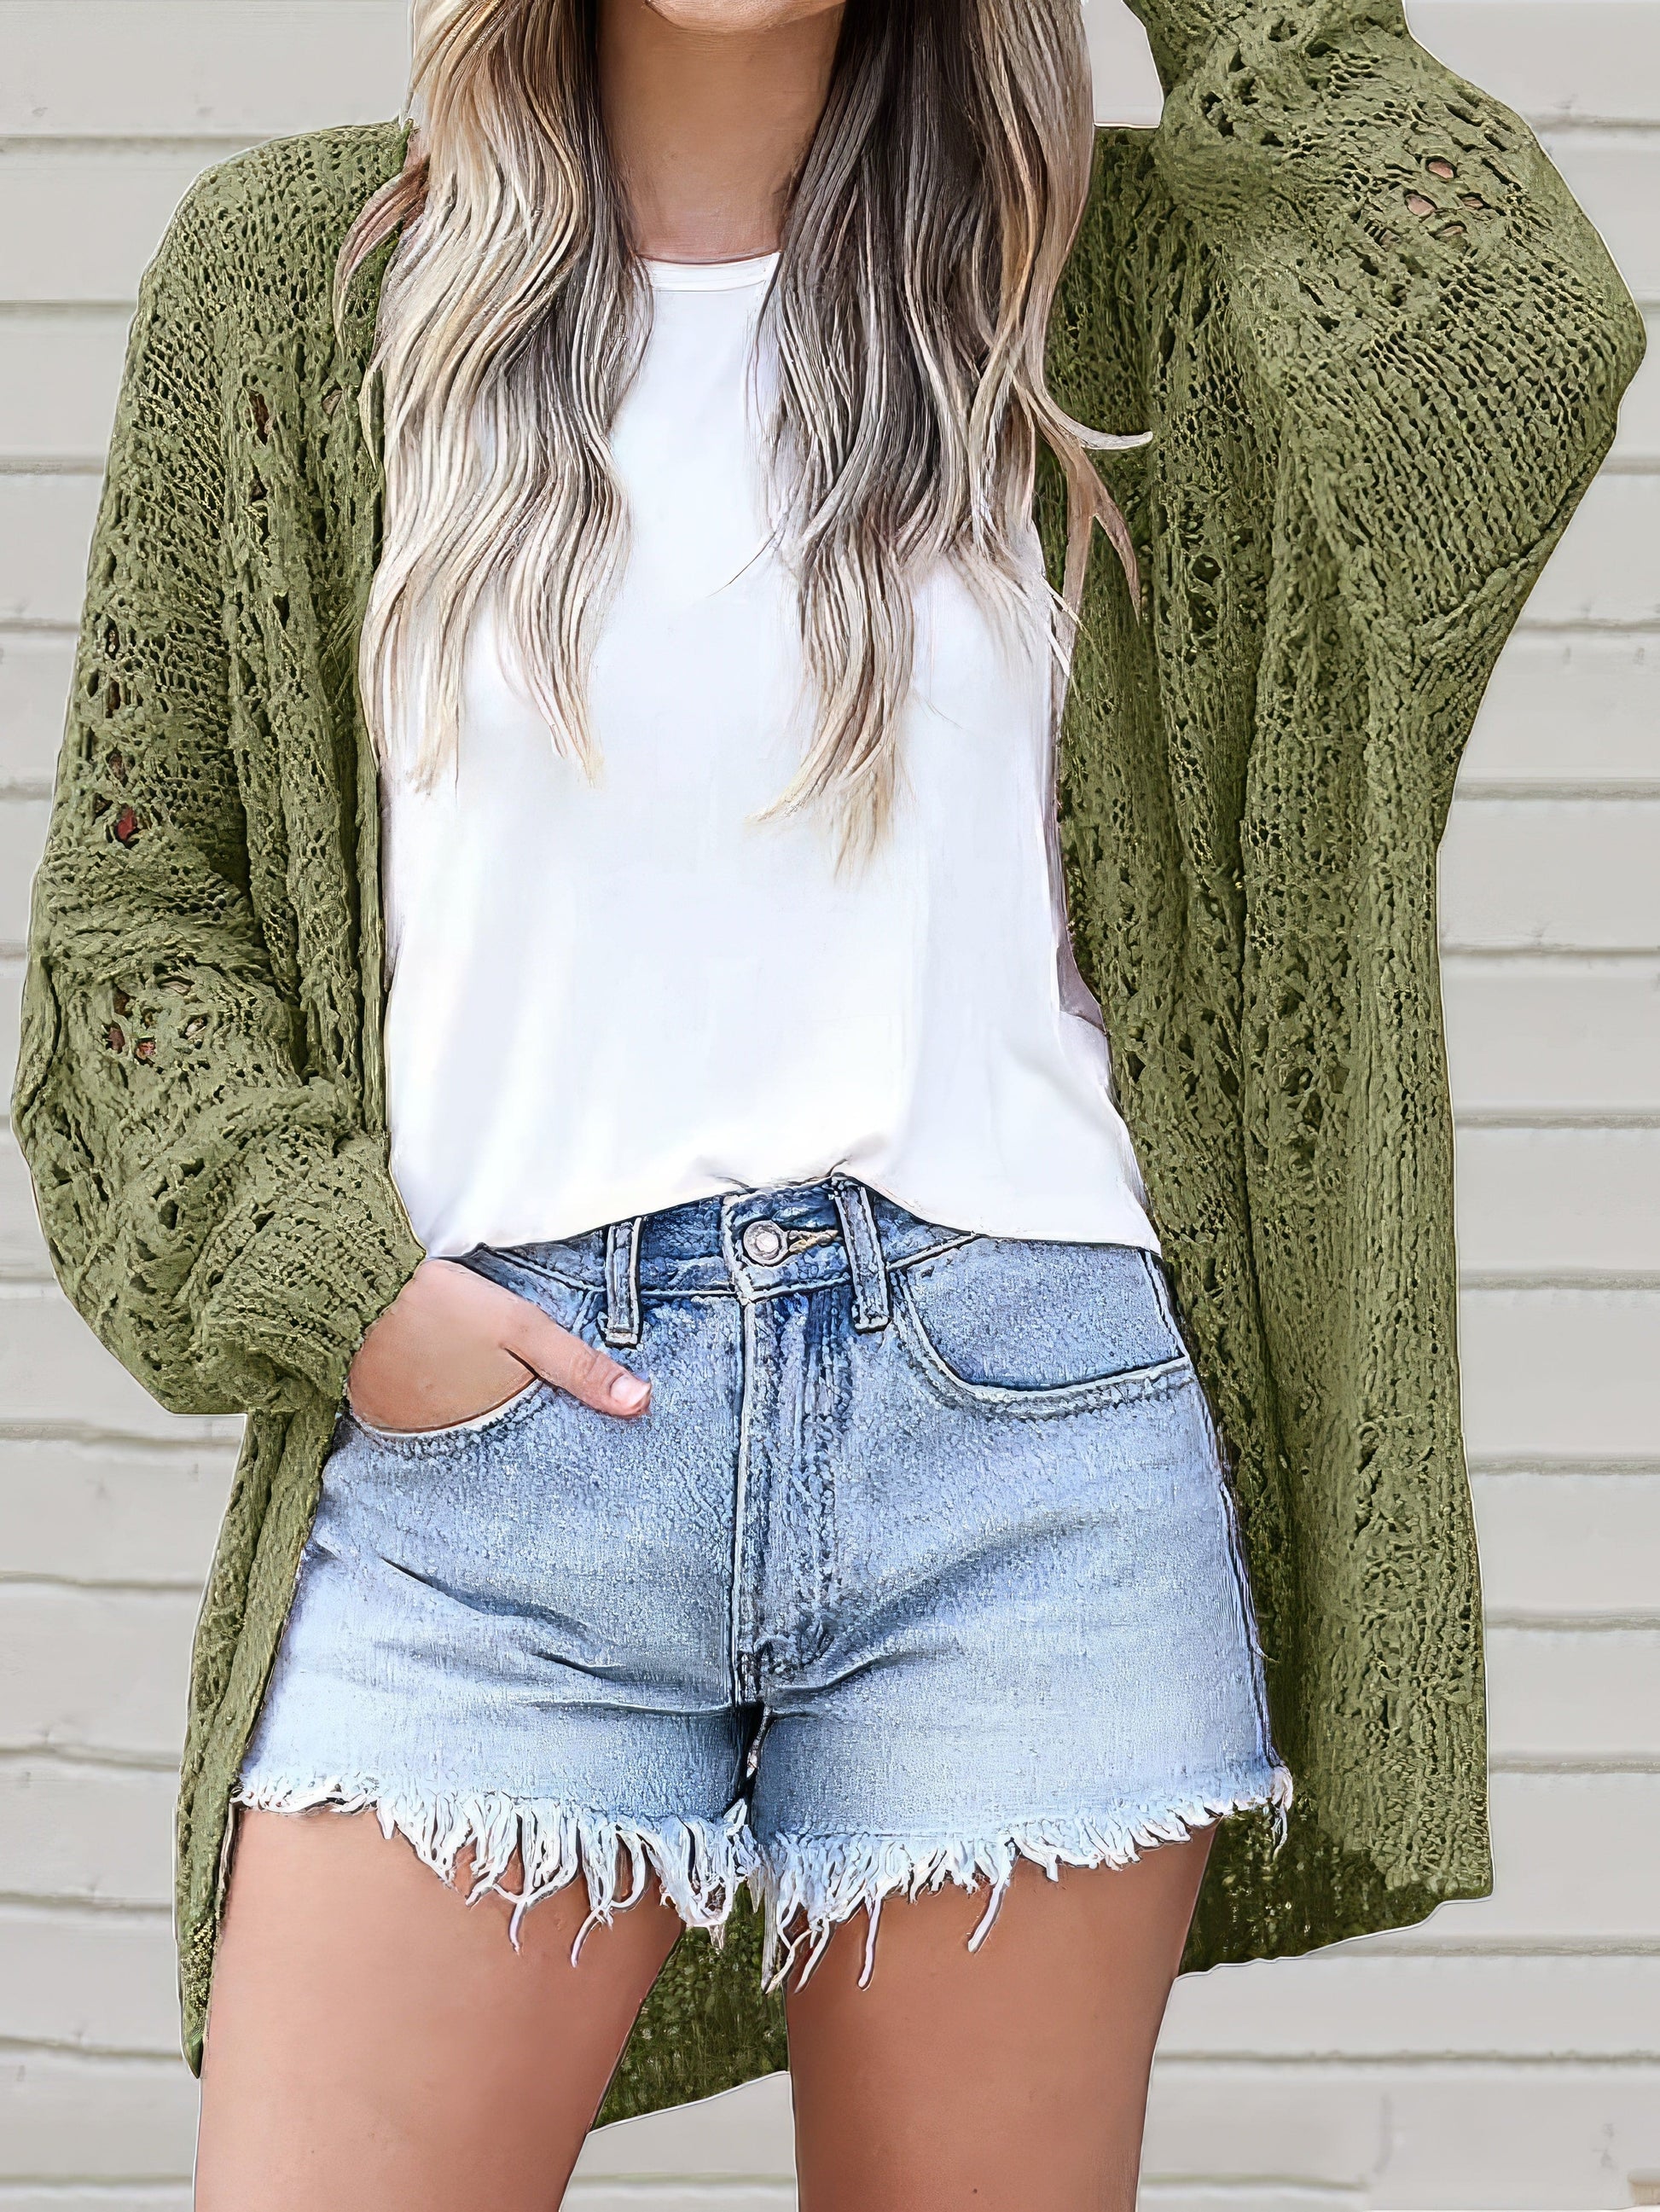 MsDressly Cardigans Crochet Loose Long Sleeve Knitted Sweater Cardigan SWE2108101117GRES